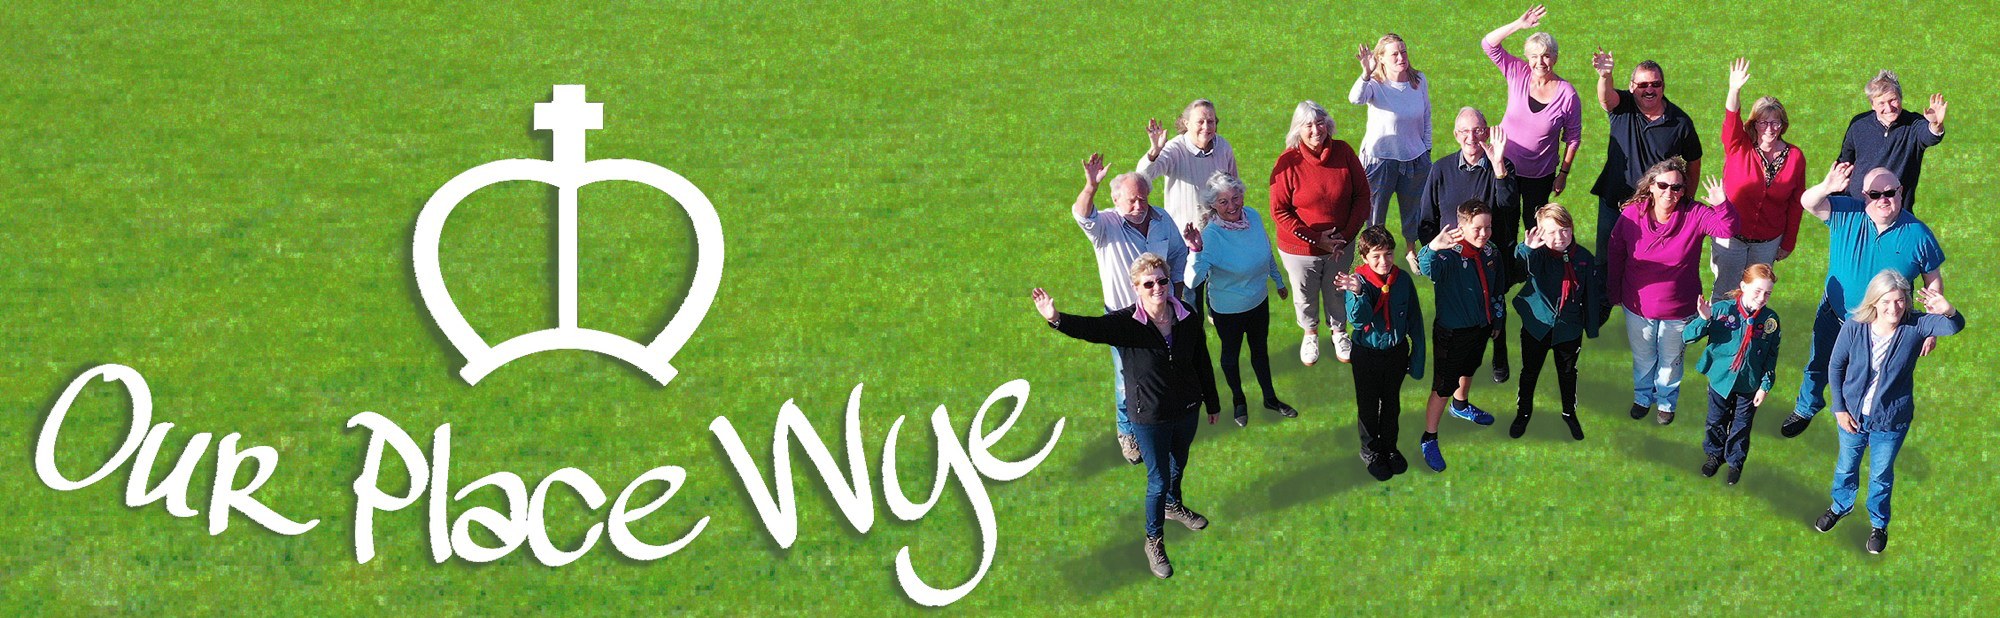 Group of Wye, Ashford residents on grass with Our Place Wye logo